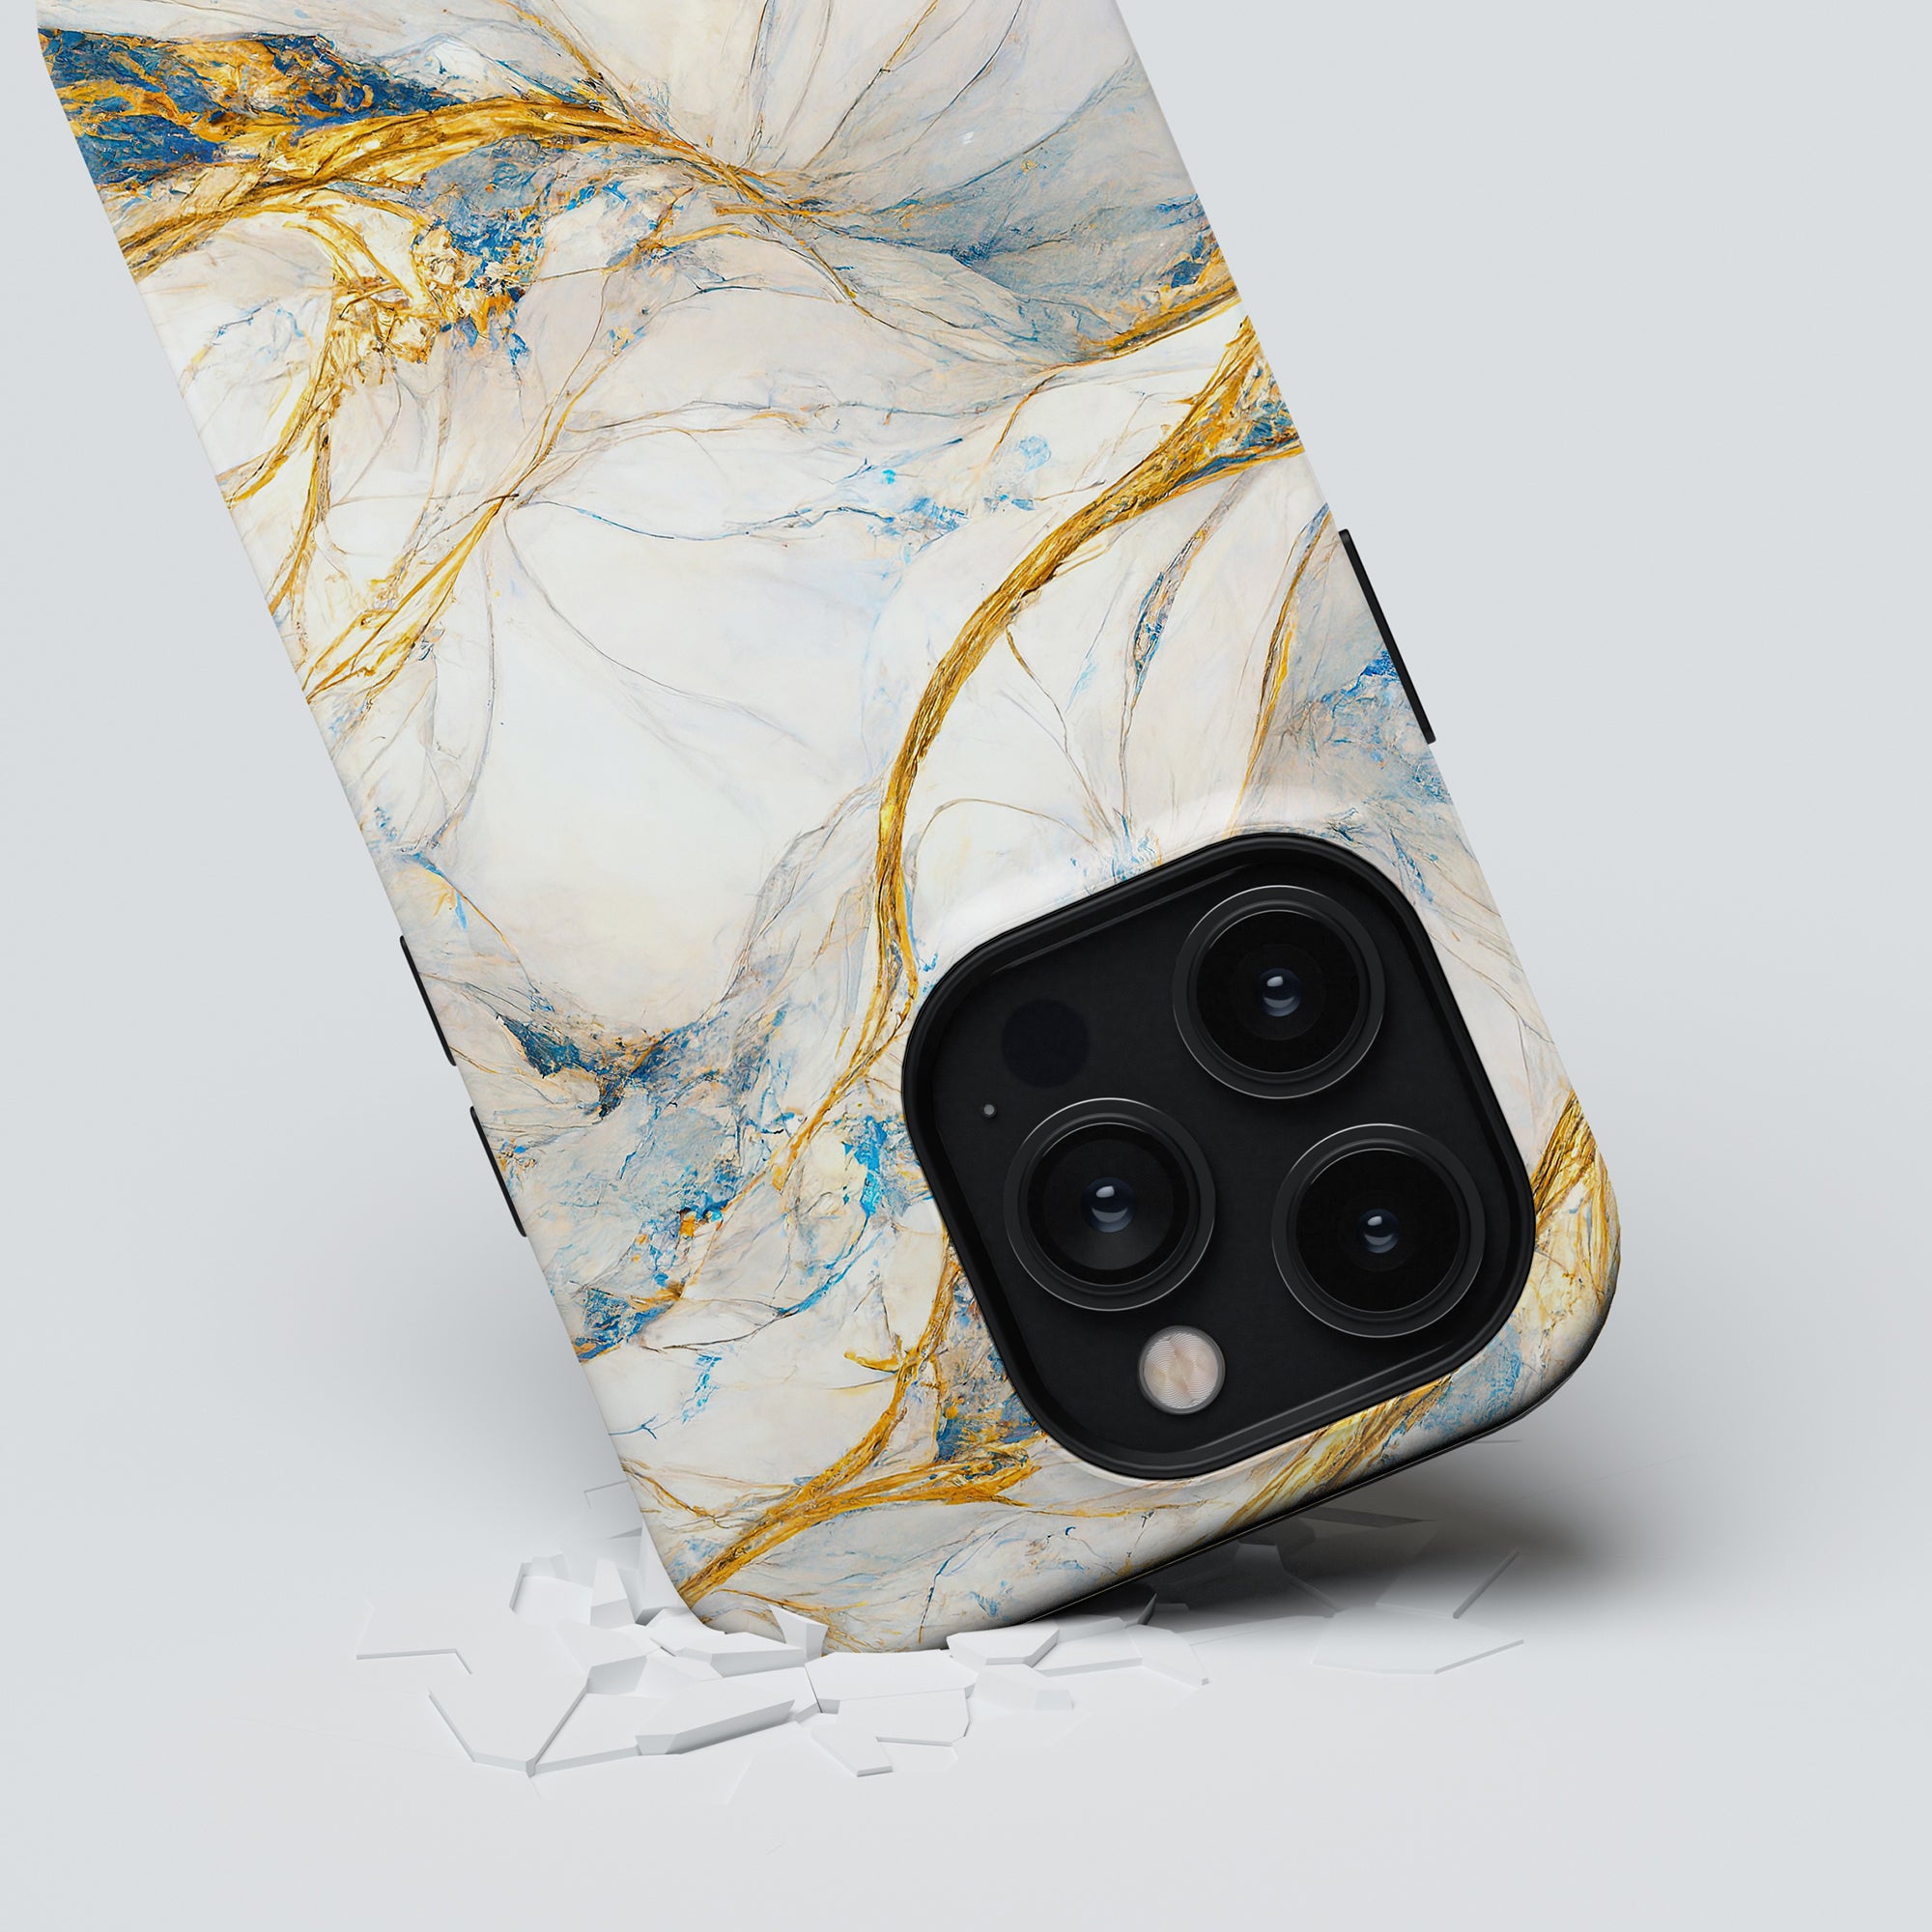 A smartphone with a Queen Marble - Tough Case, three camera lenses, partially submerged in a white cracked surface.